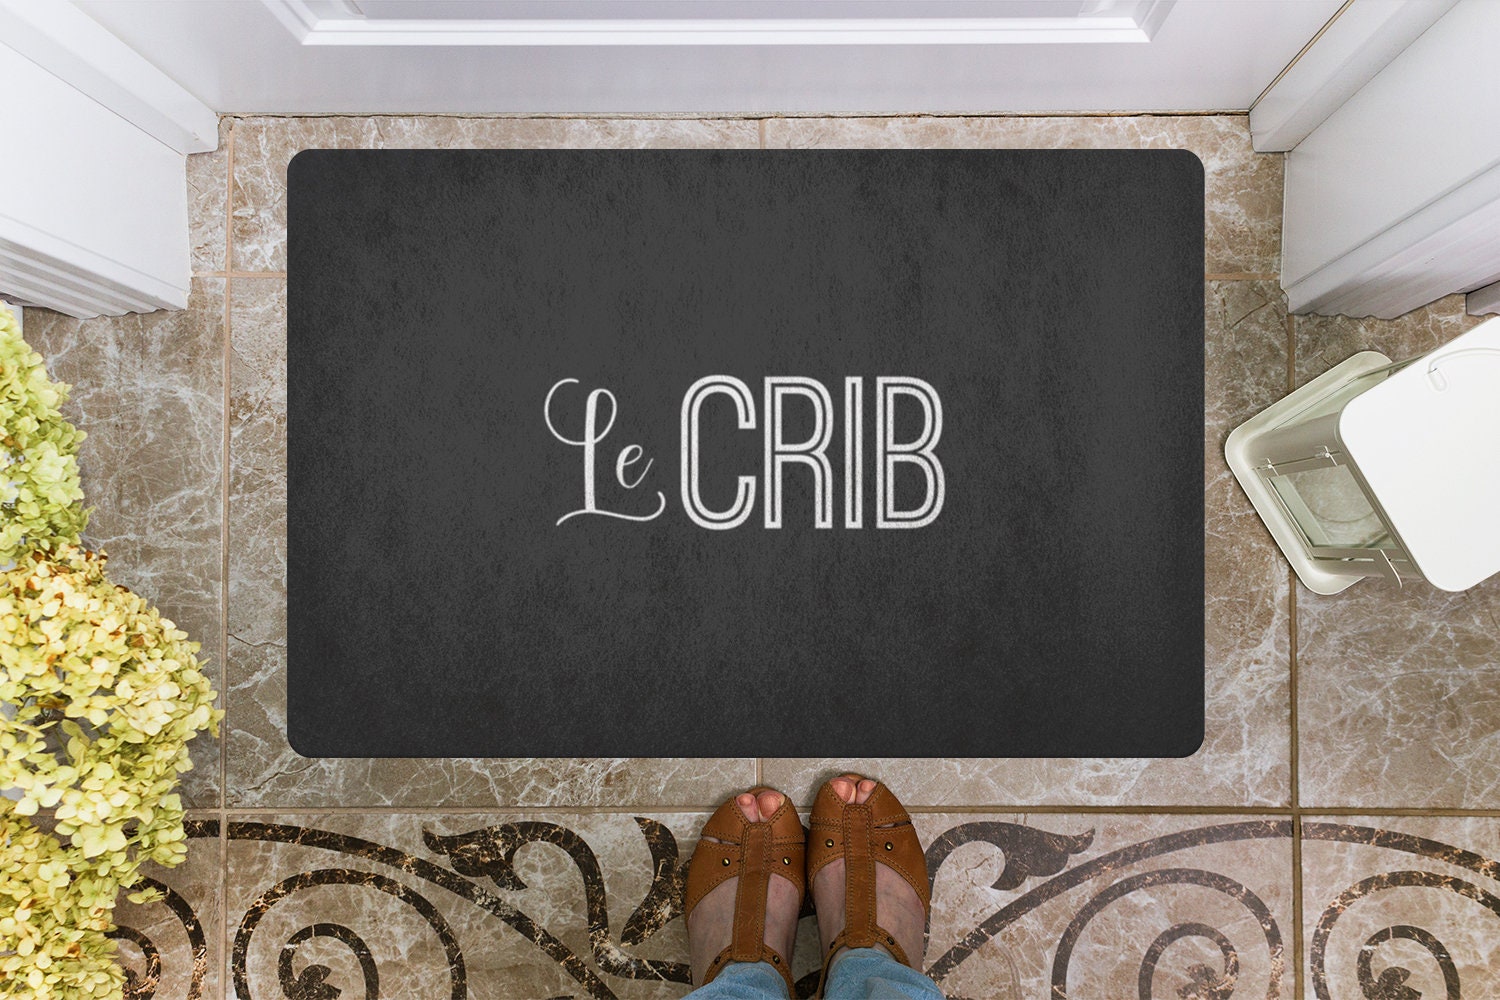 Funny Door mat Welcome mat Small 16 x 24 Inches Funny doormat Welcome to our crib Door mat Welcome to our crib Doormat housewarming gift funny gift idea